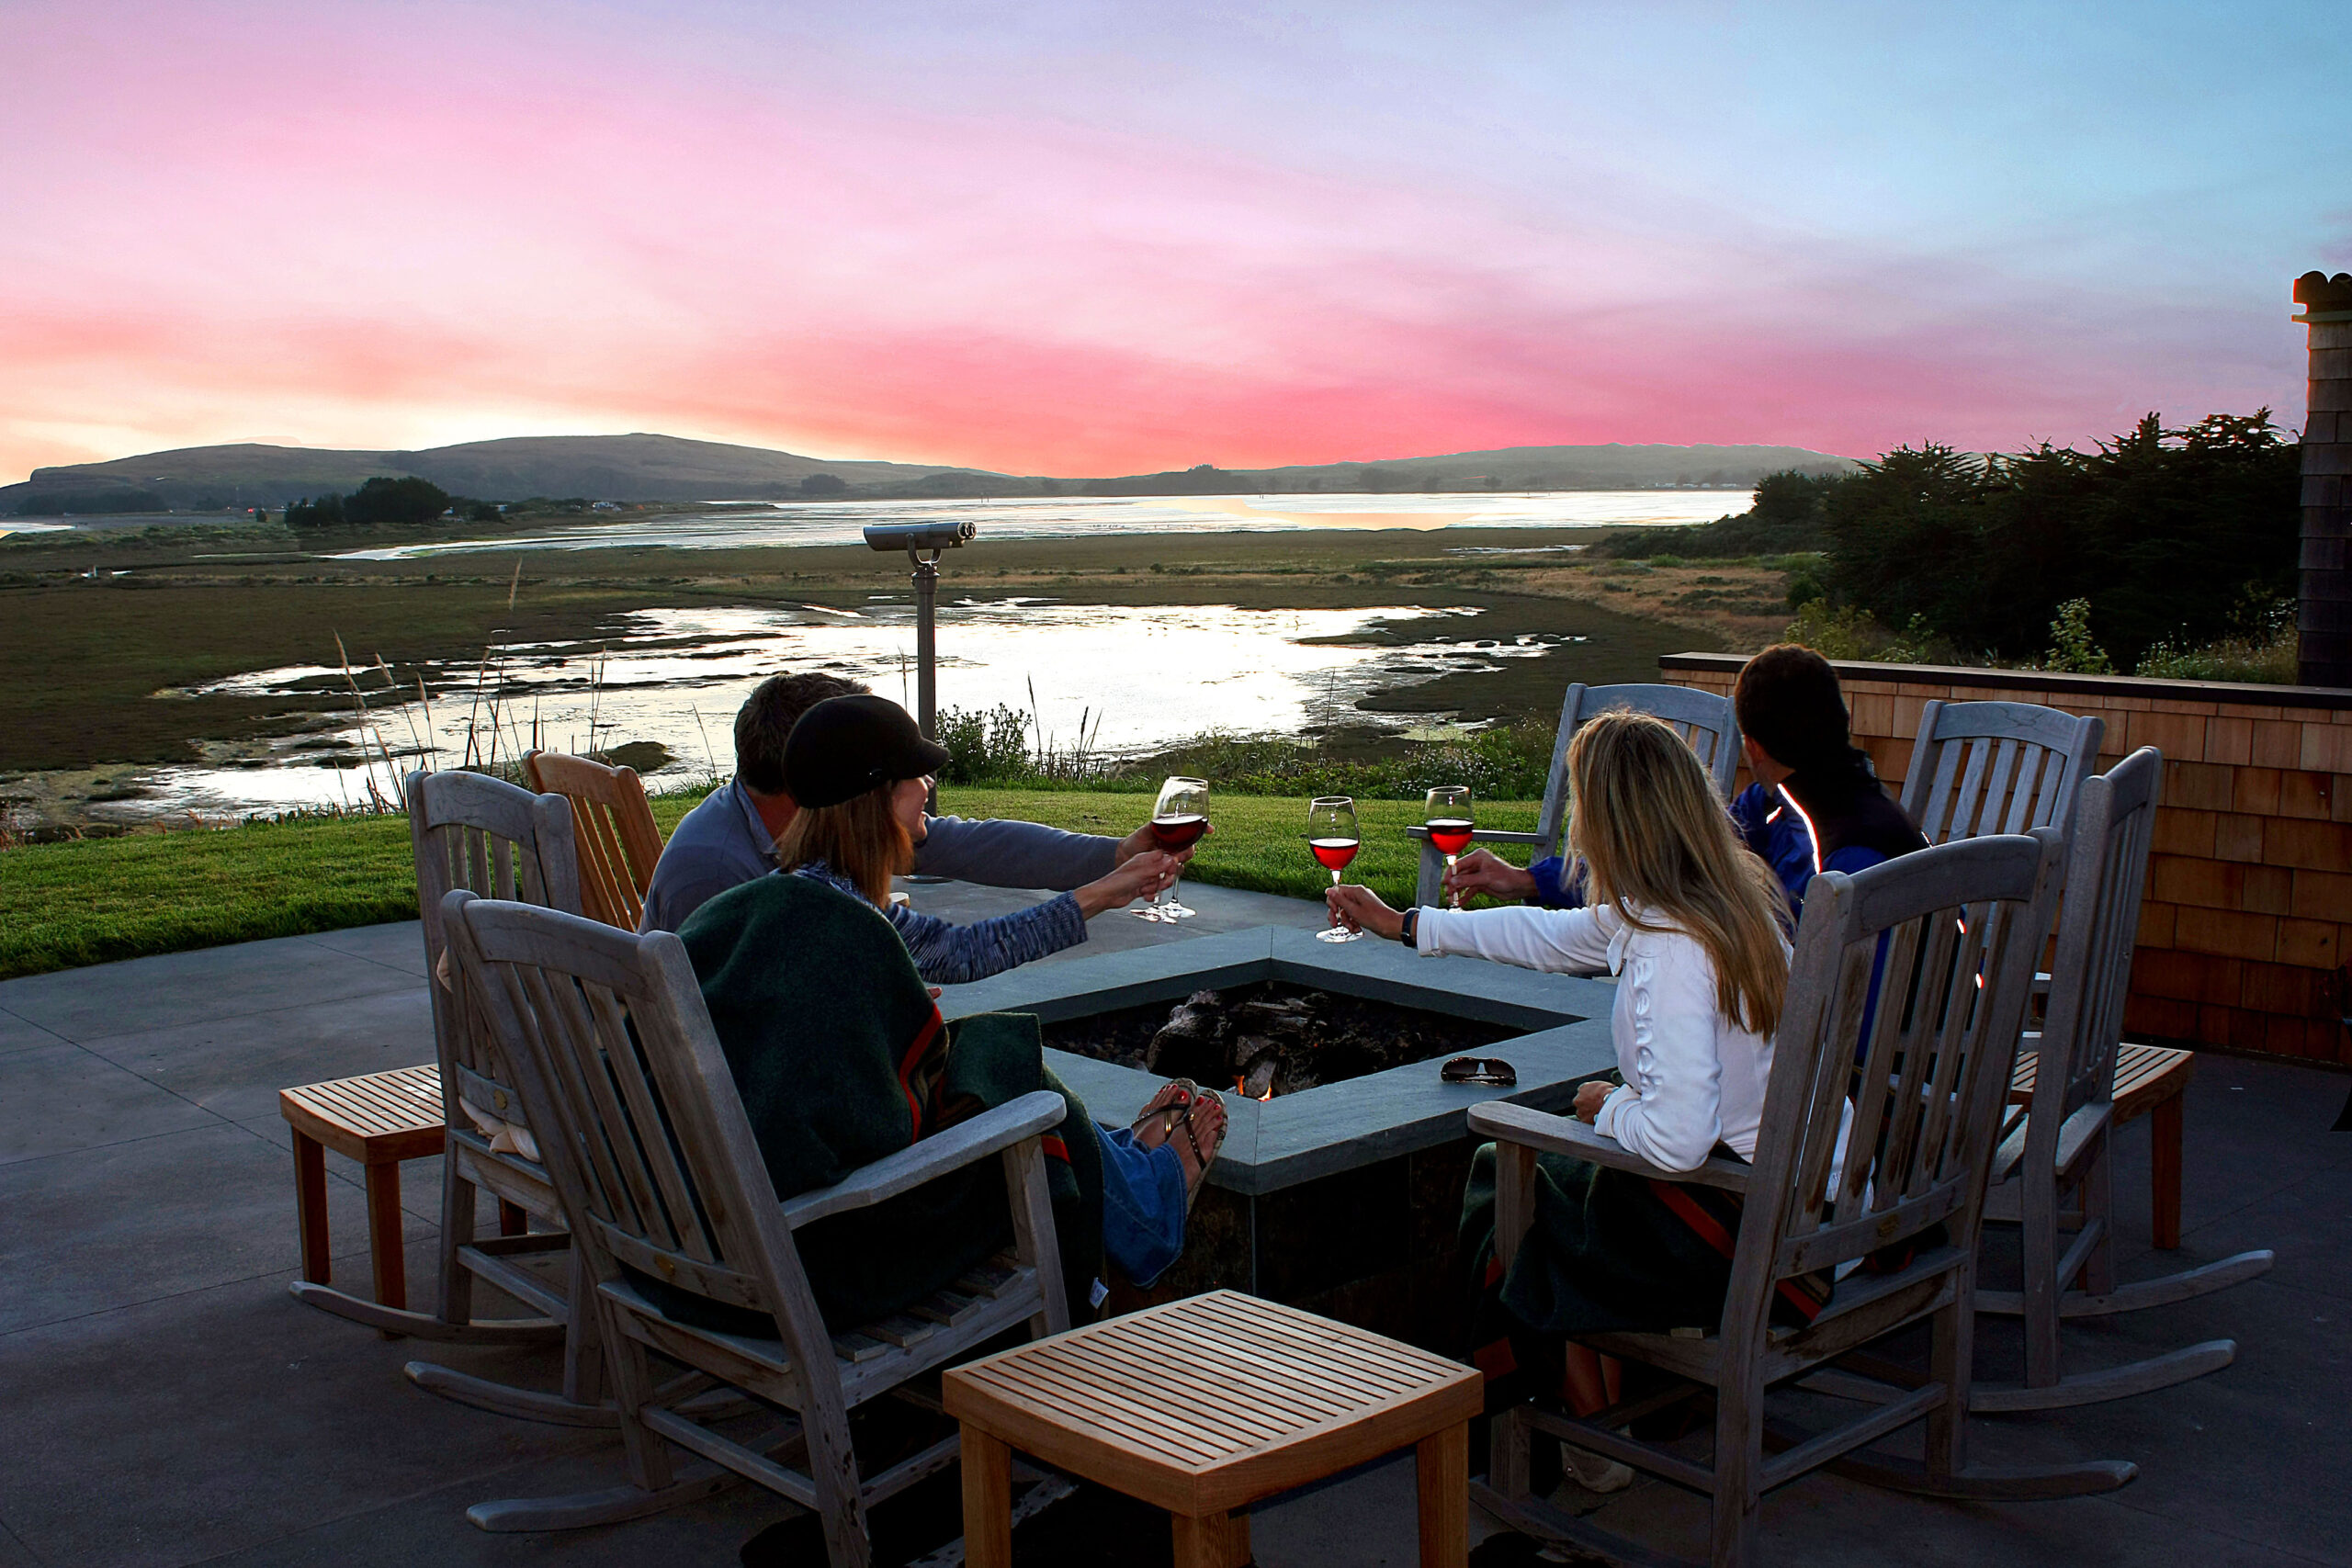 The Duck Club in Bodega Bay, CA has been named one of the 10 Most Beautiful Restaurant Views in America according to People.com.